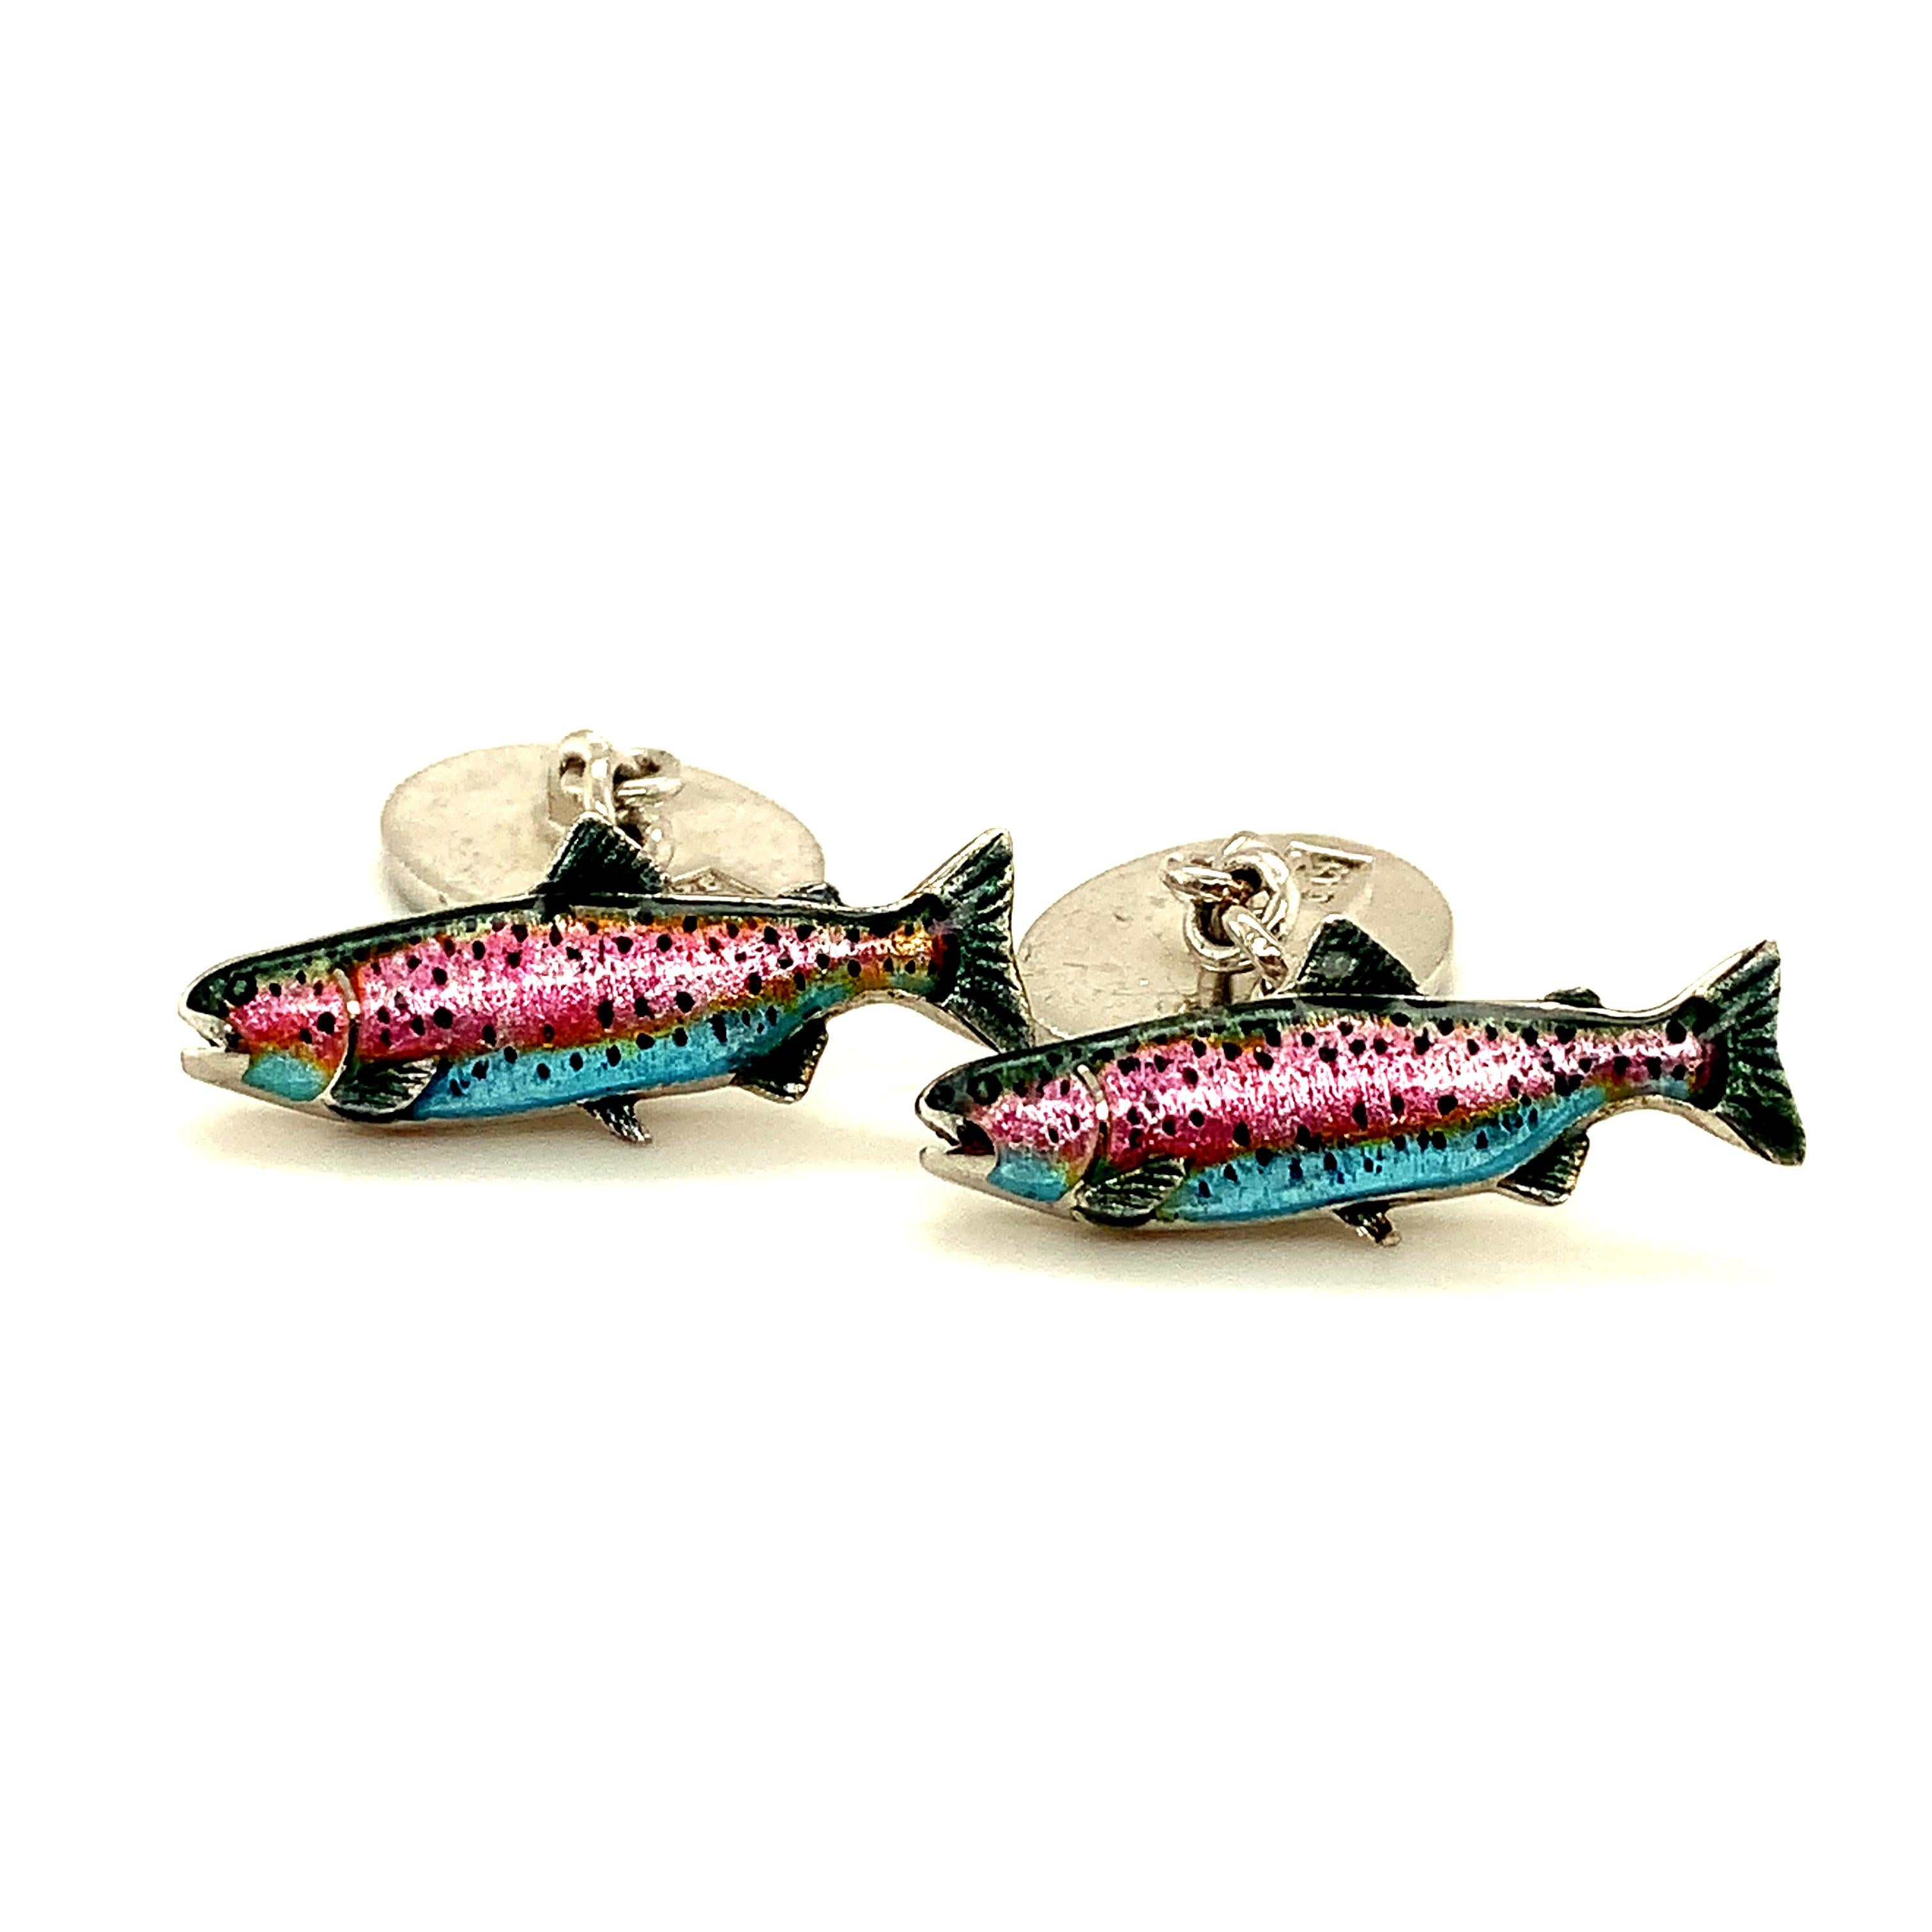 Bright and festive sterling silver cufflinks.  The front is an enamel figural 